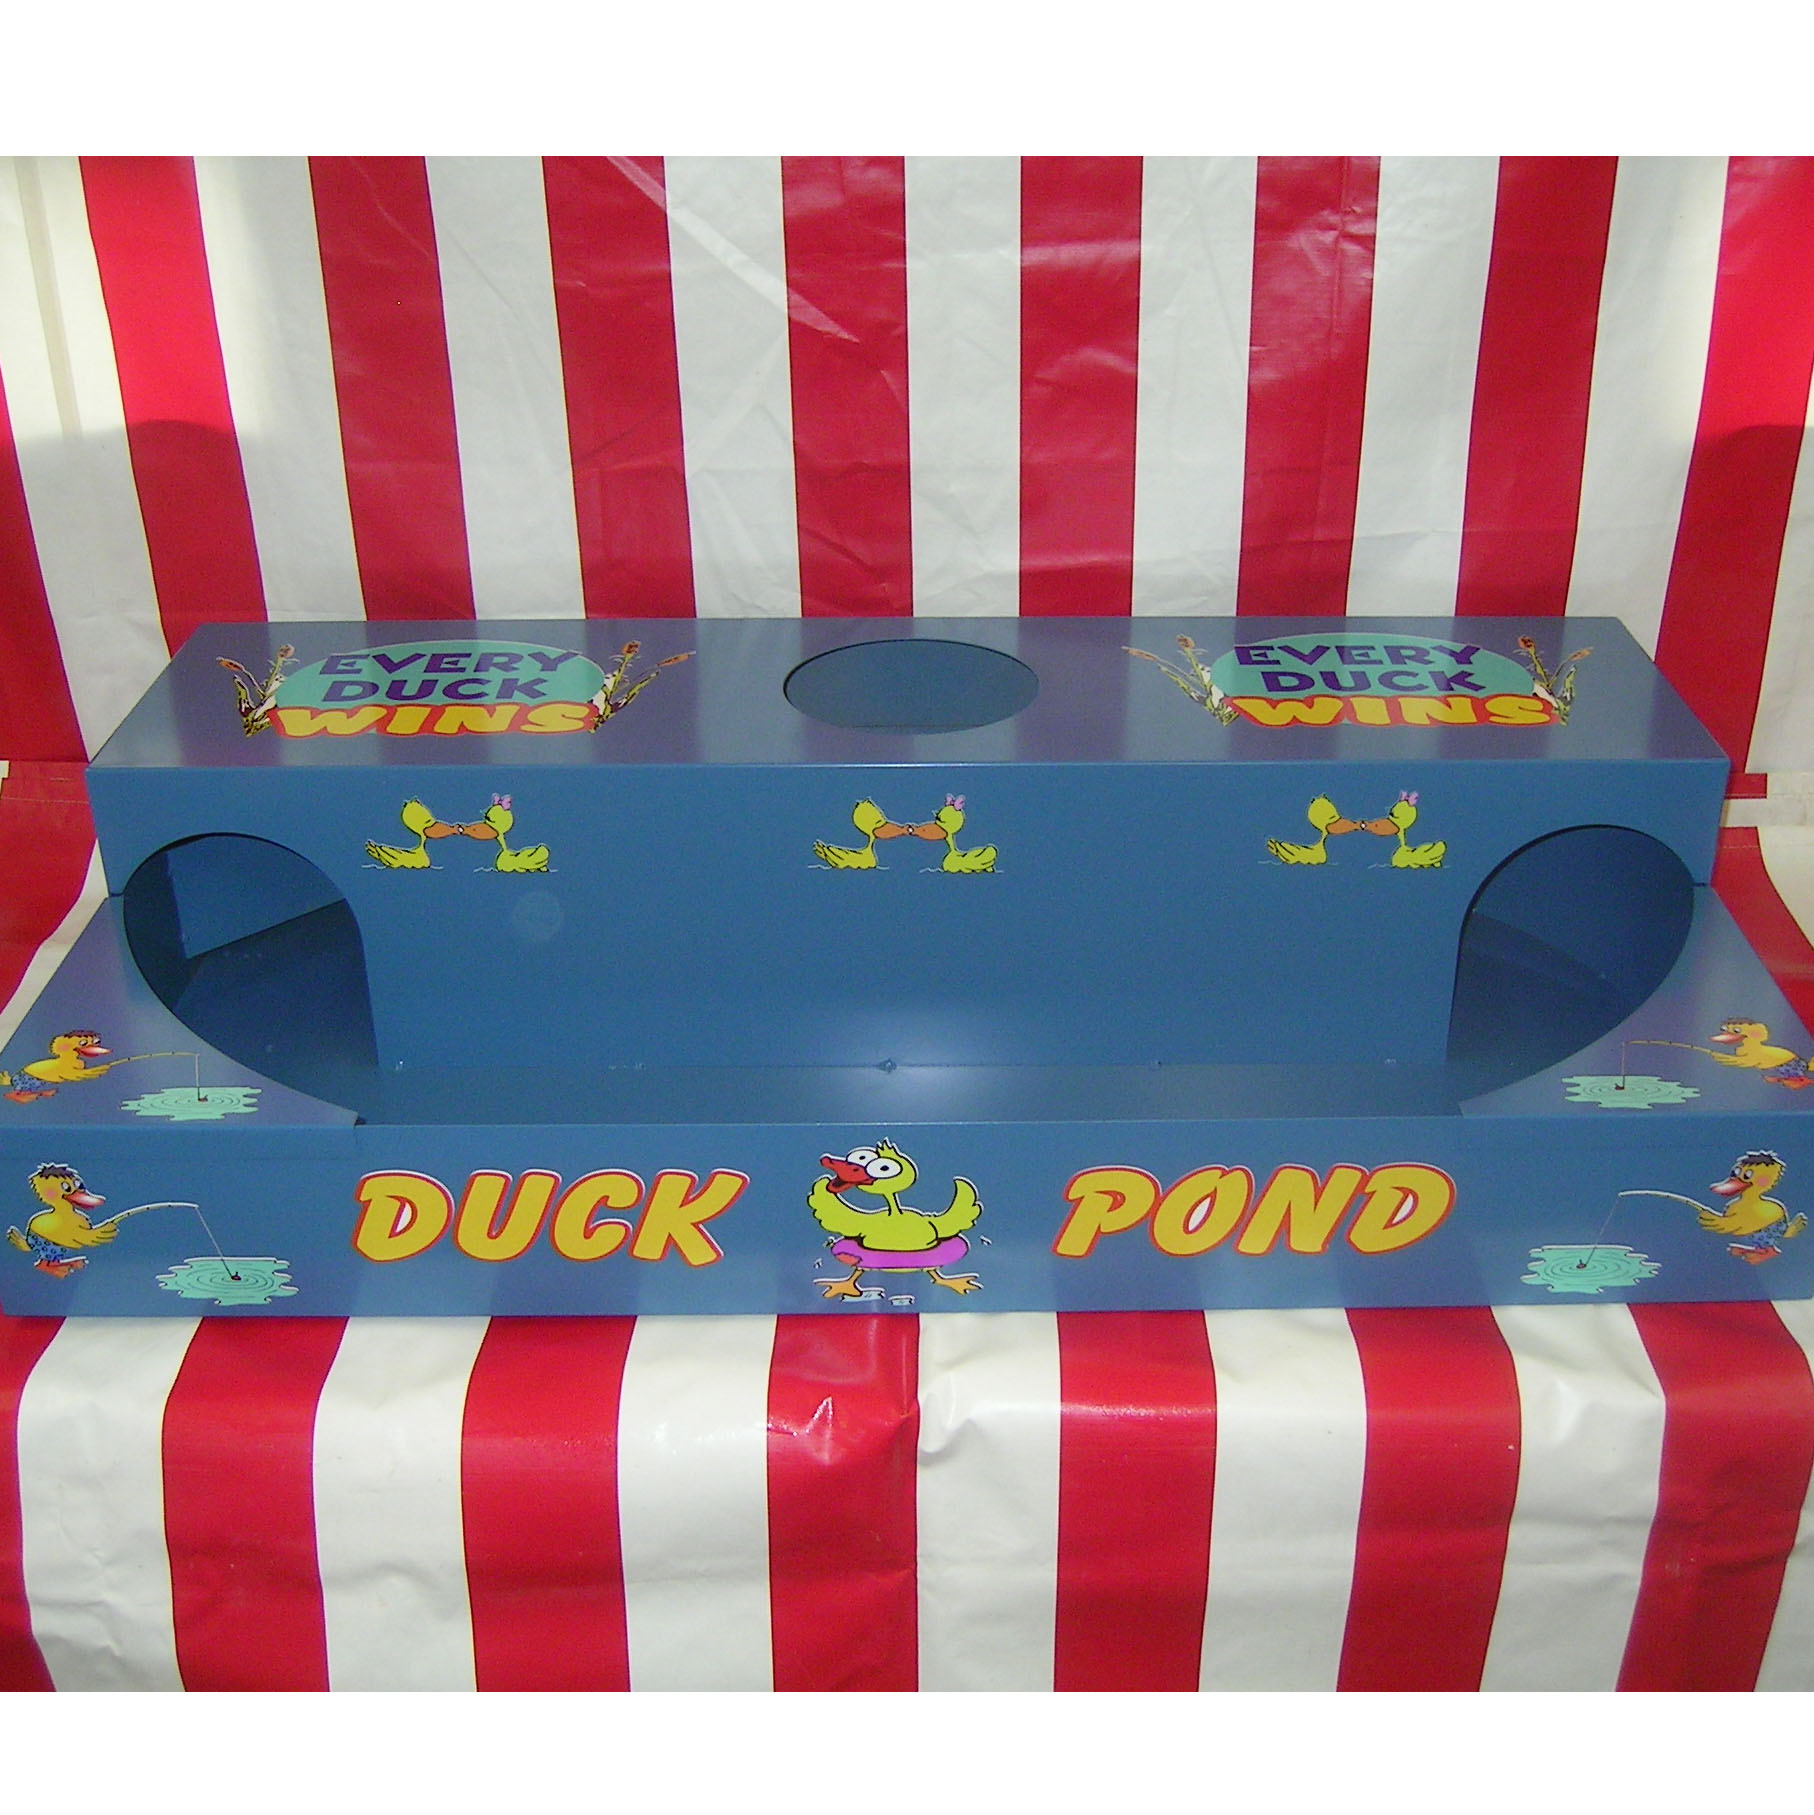 Duck Pond - American Party RentalAmerican Party Rental